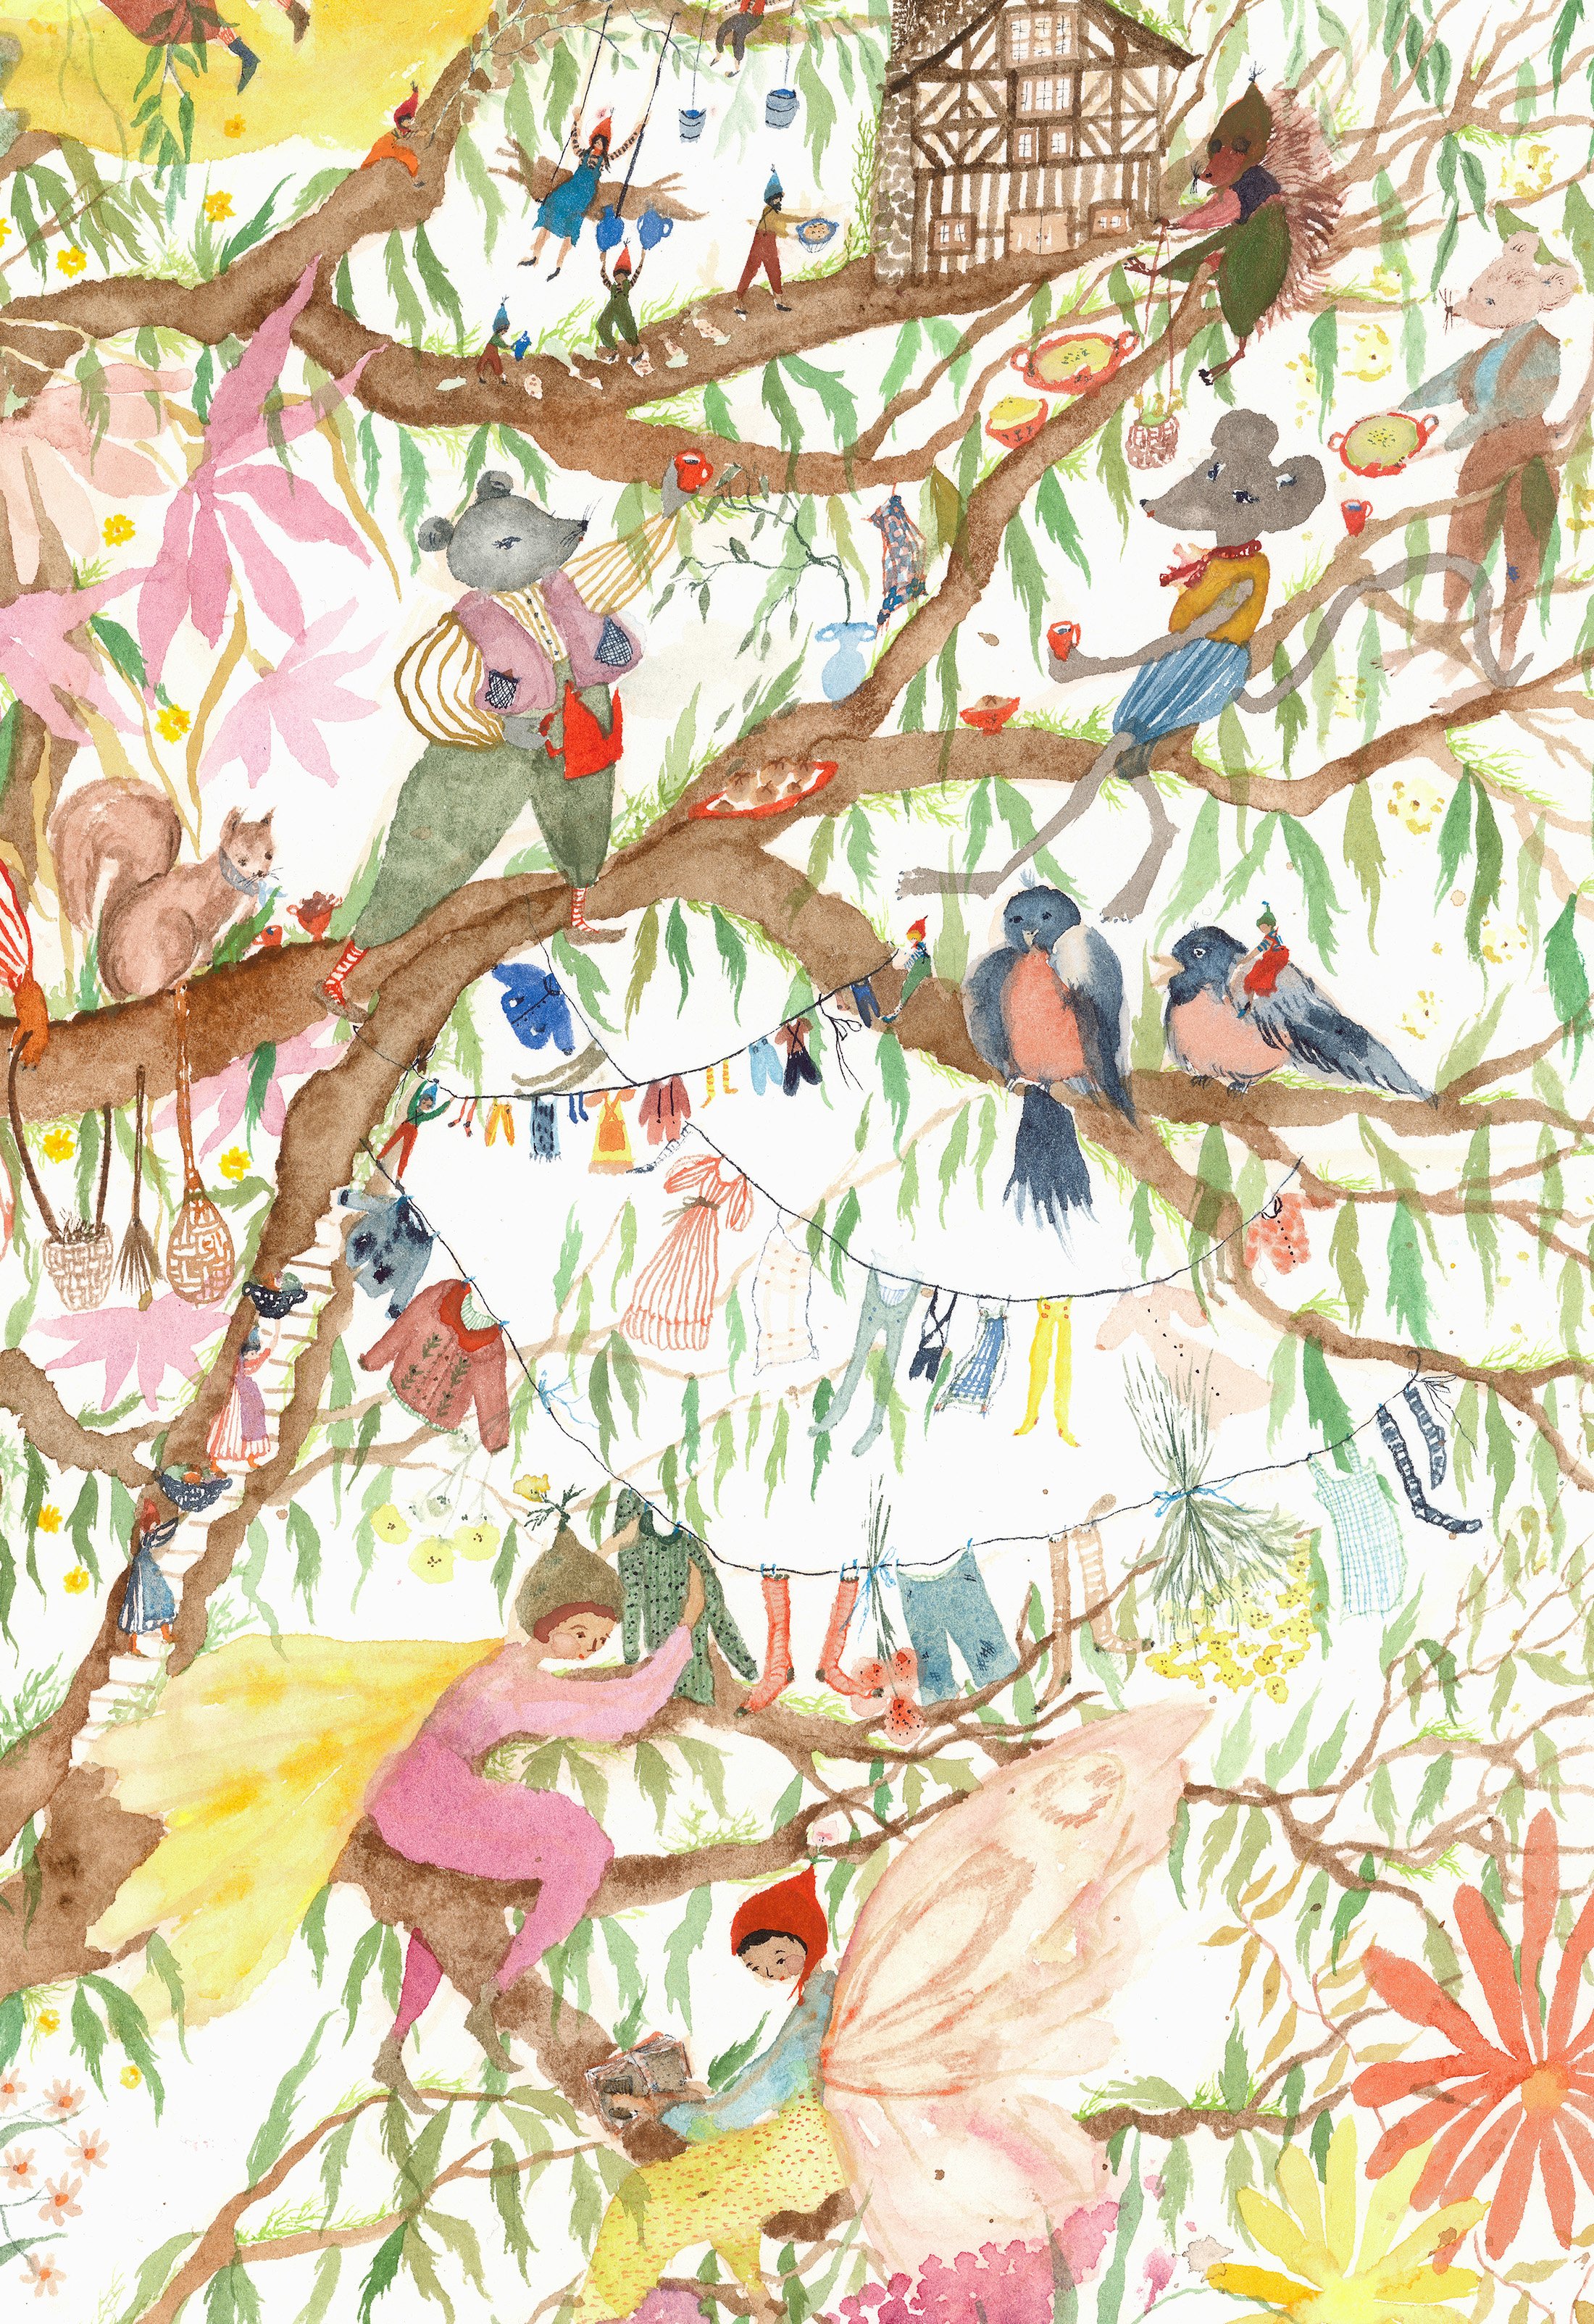   Fairy Tree, detail   Watercolor on paper, 2023  22” x 30”  $4500  Sold 